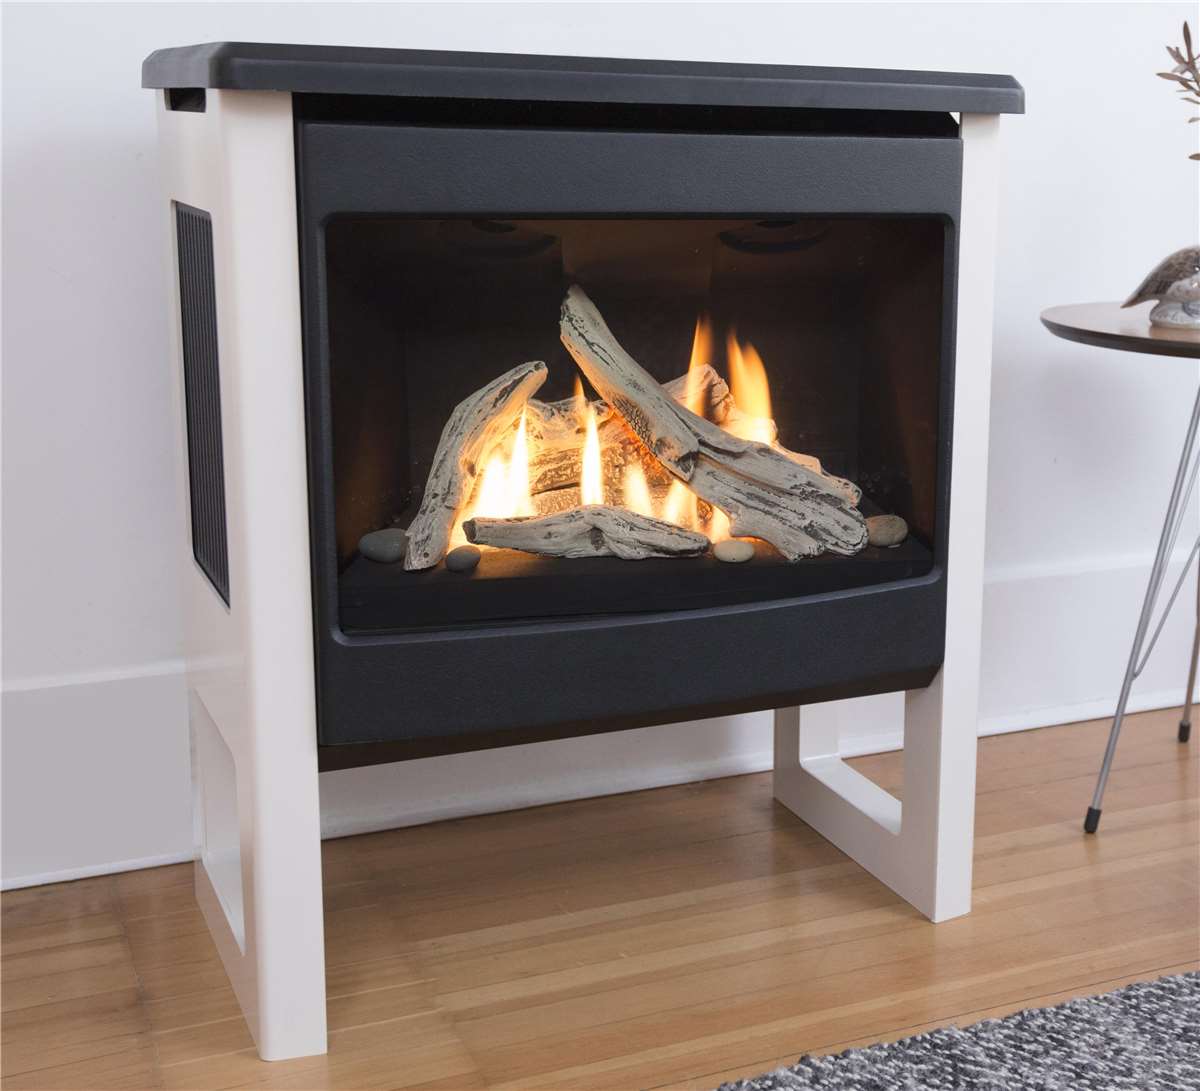 Valor MF28 Madrona Freestanding Series - Traditional & Modern   Full Size Image